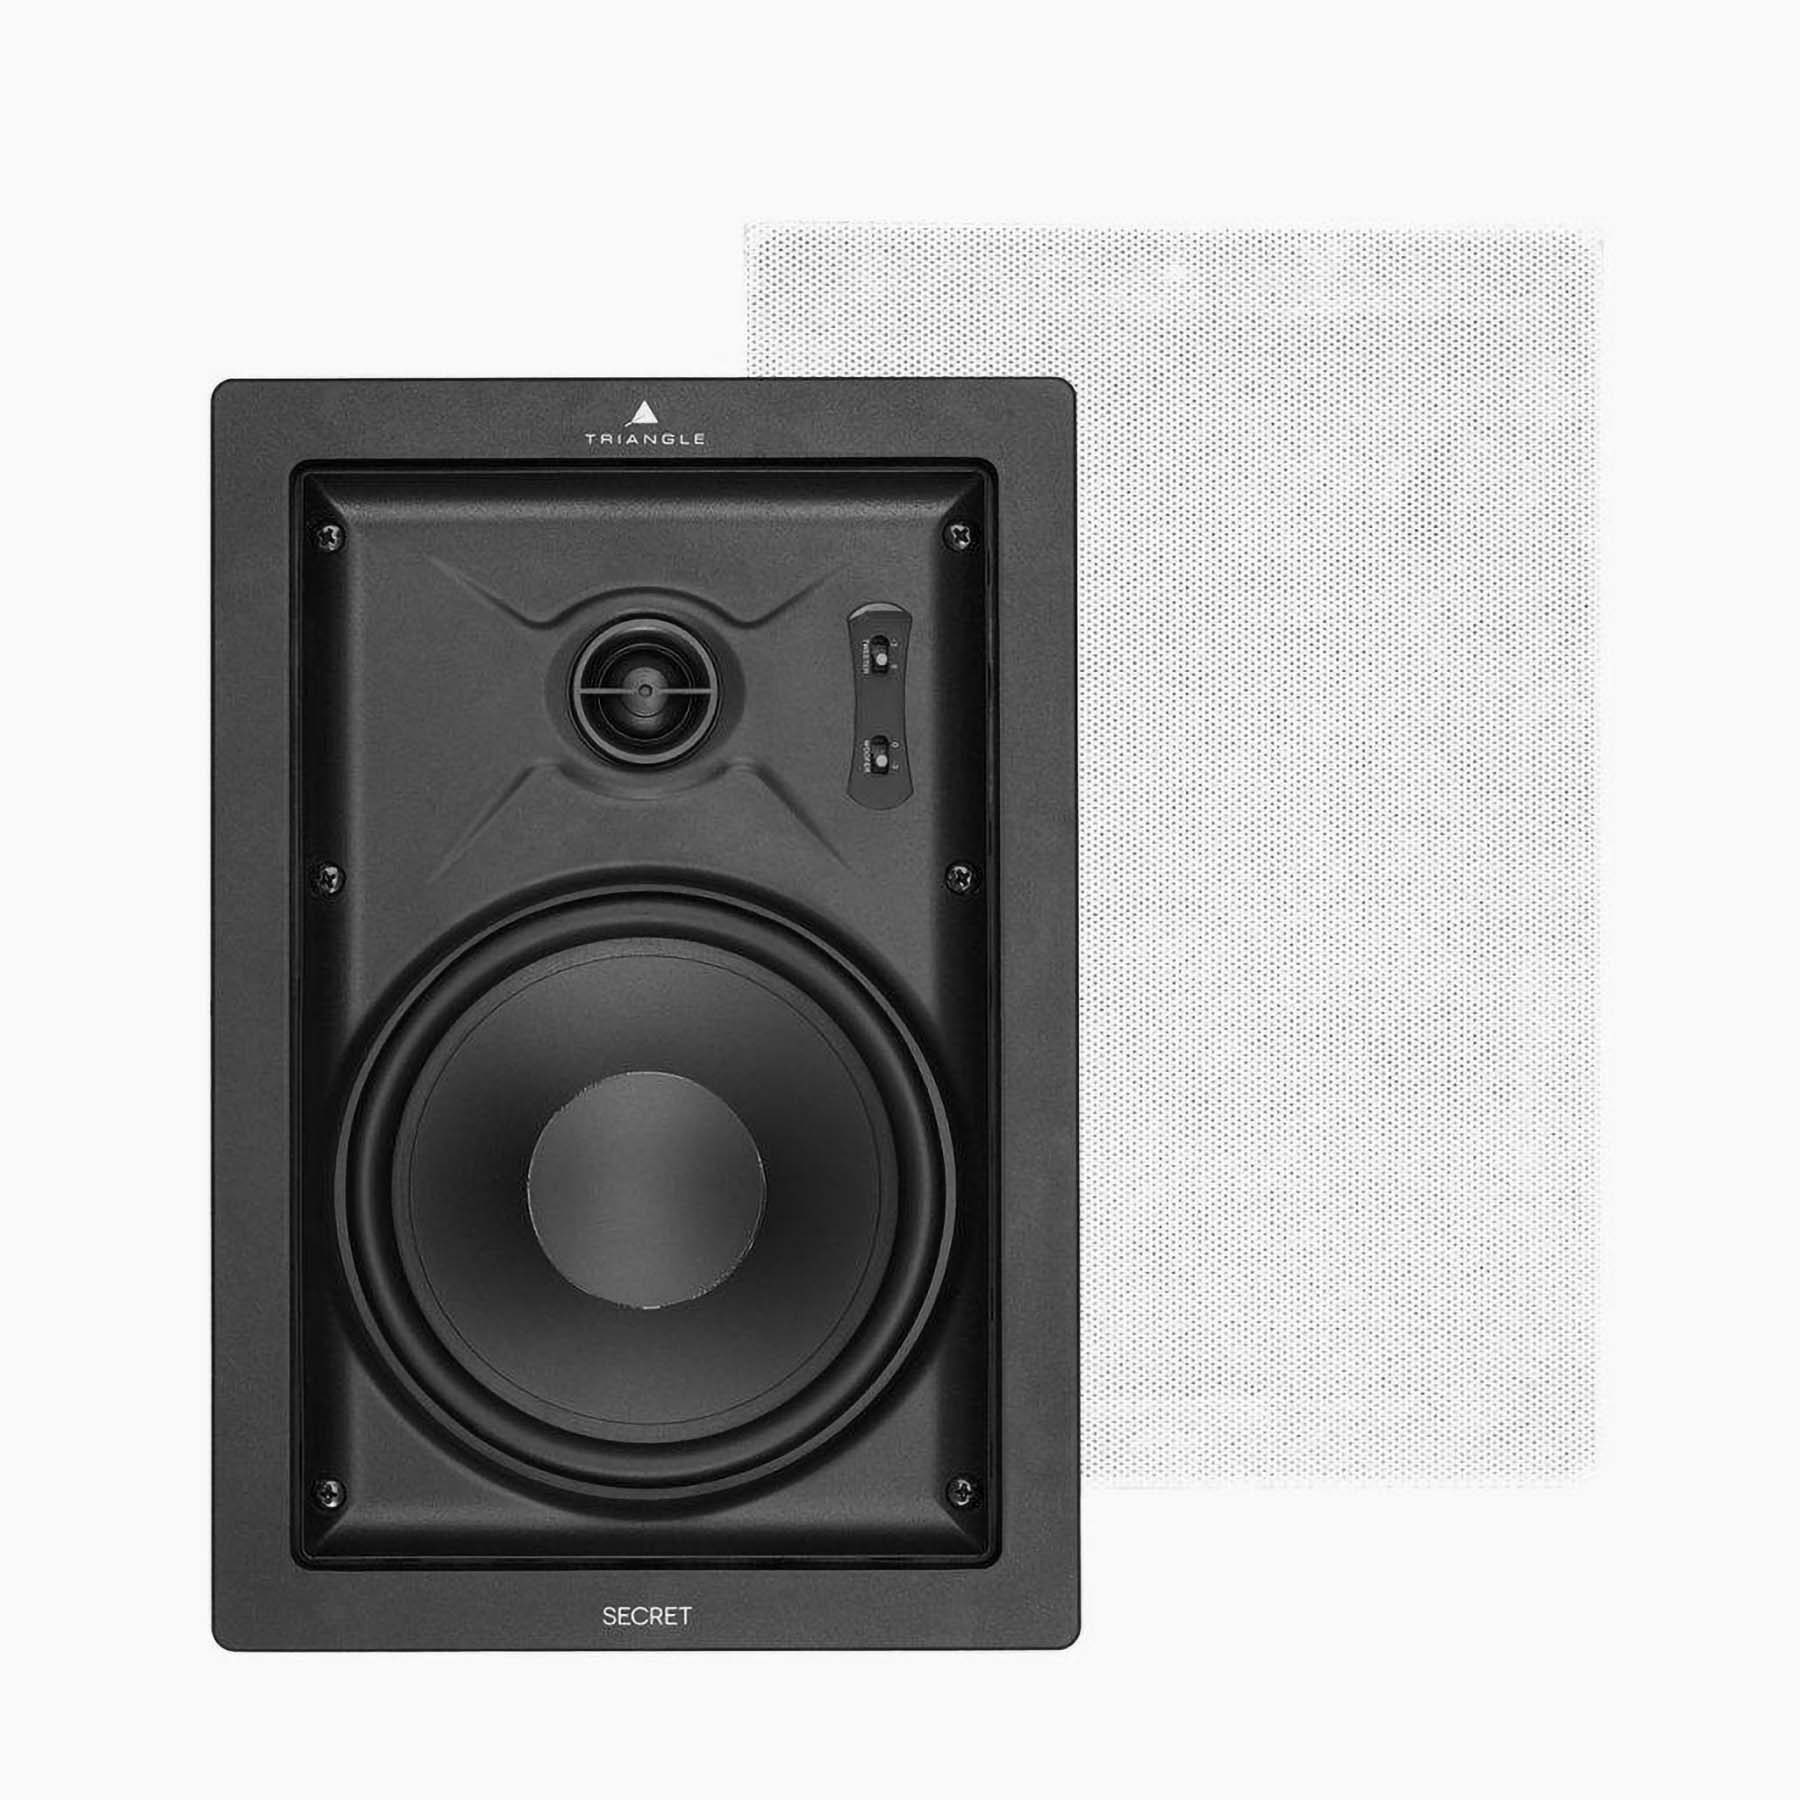 TRIANGLE Secret IWT8 8-Inch Rectangular In-Wall Speakers (pair)